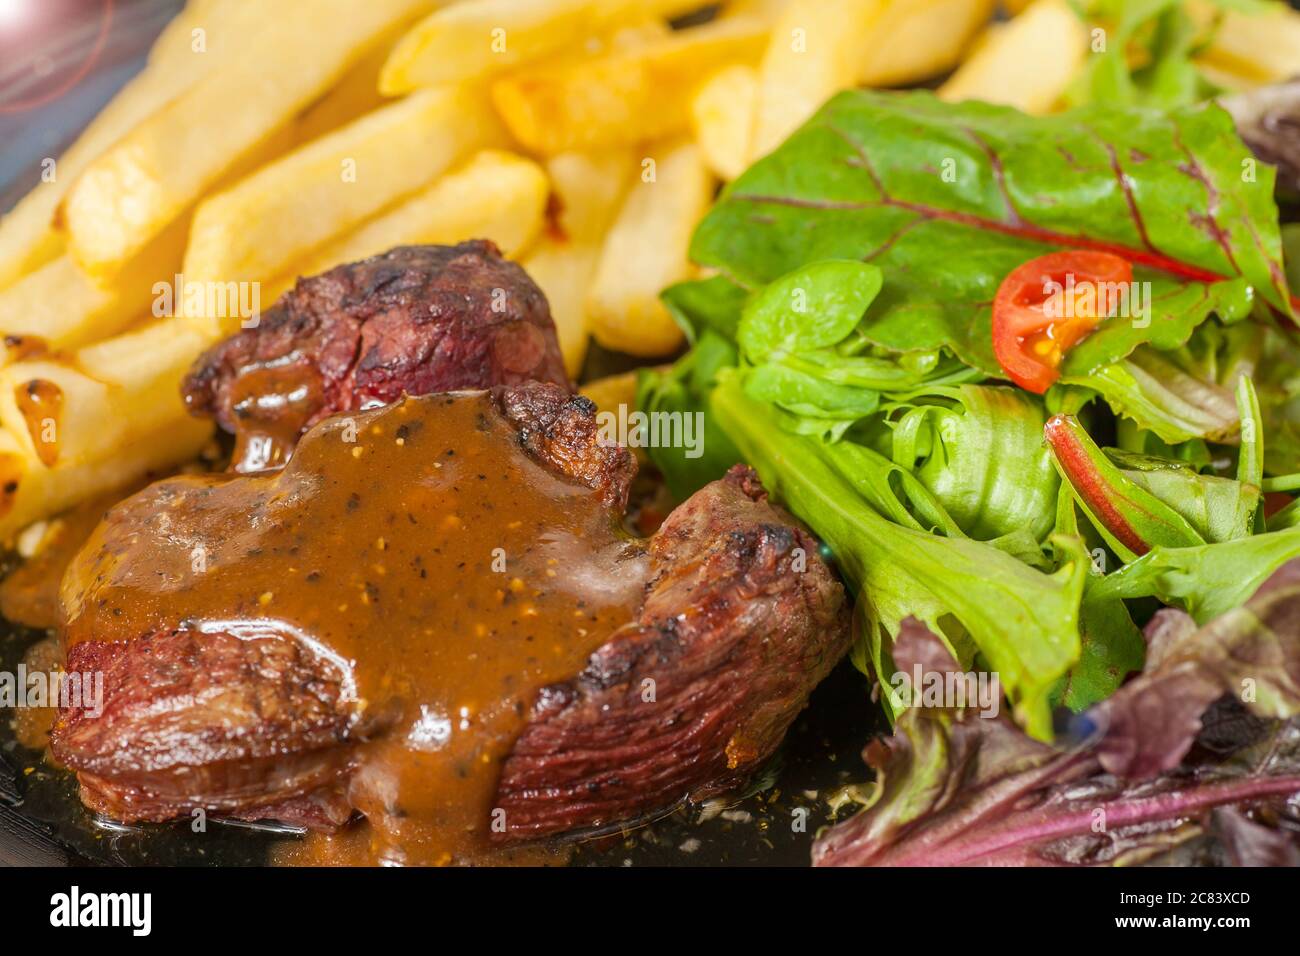 Close up view of a western food main course Stock Photo